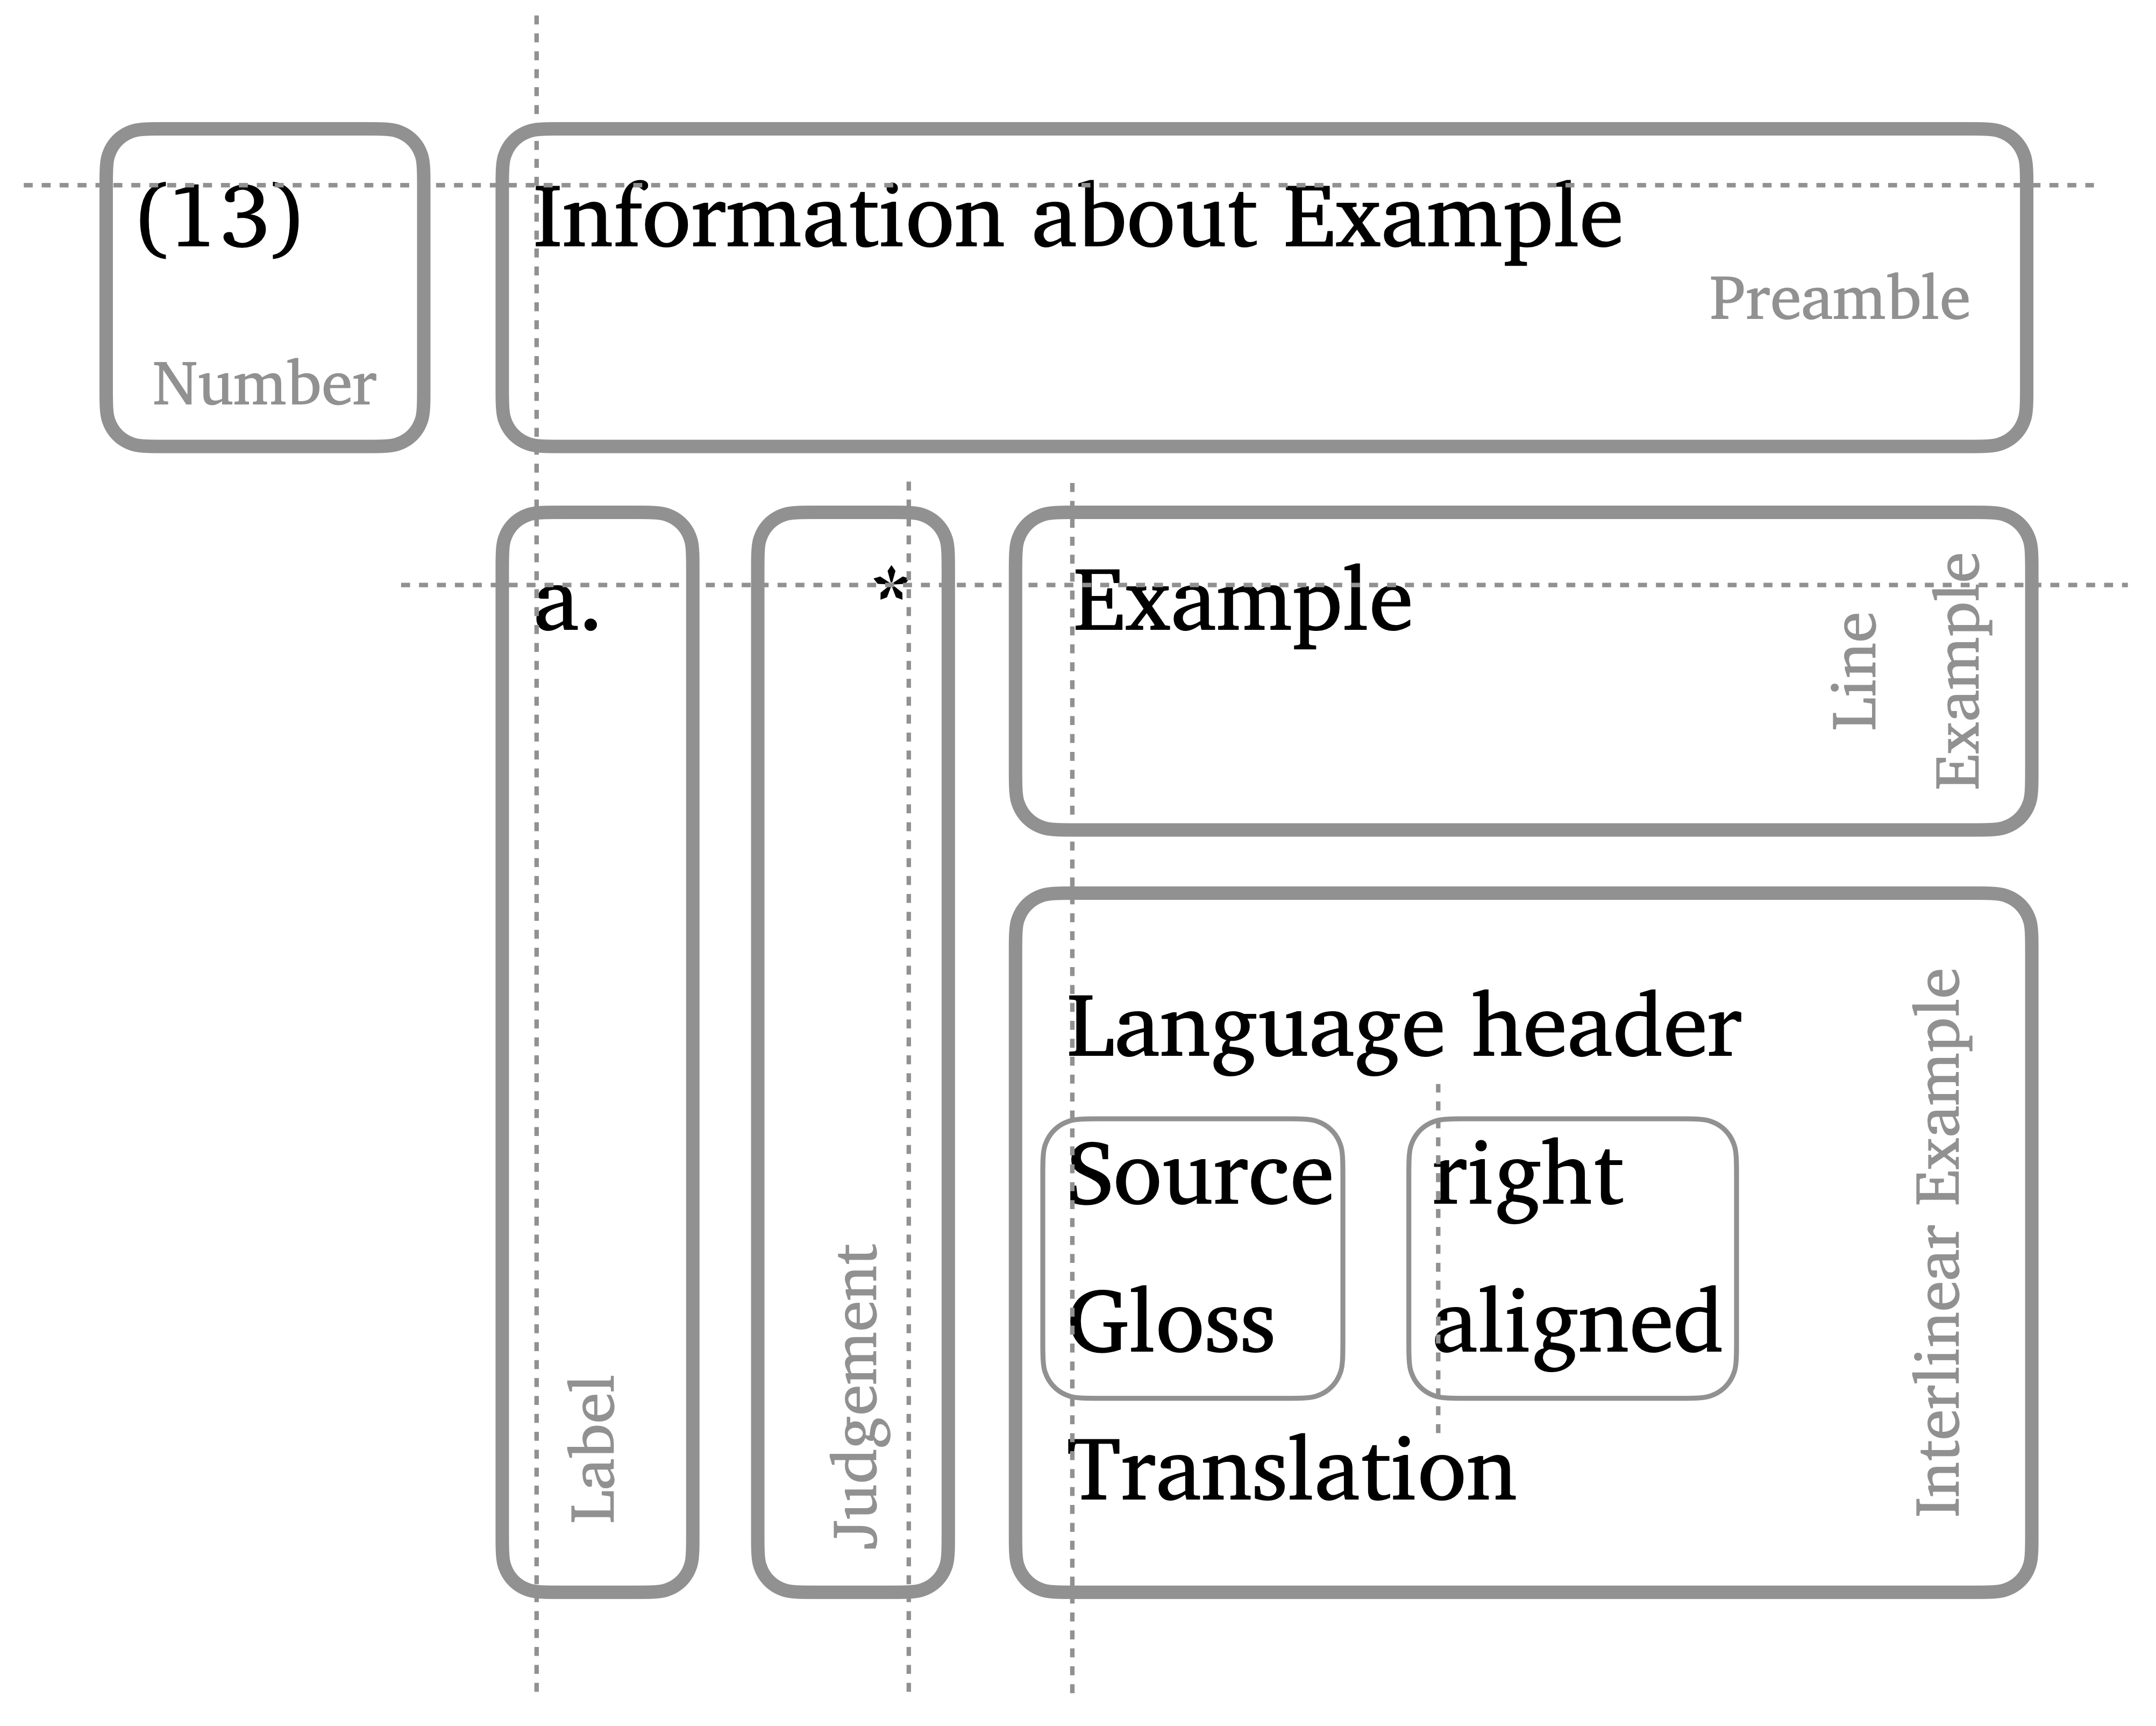 The structure of a linguistic example.